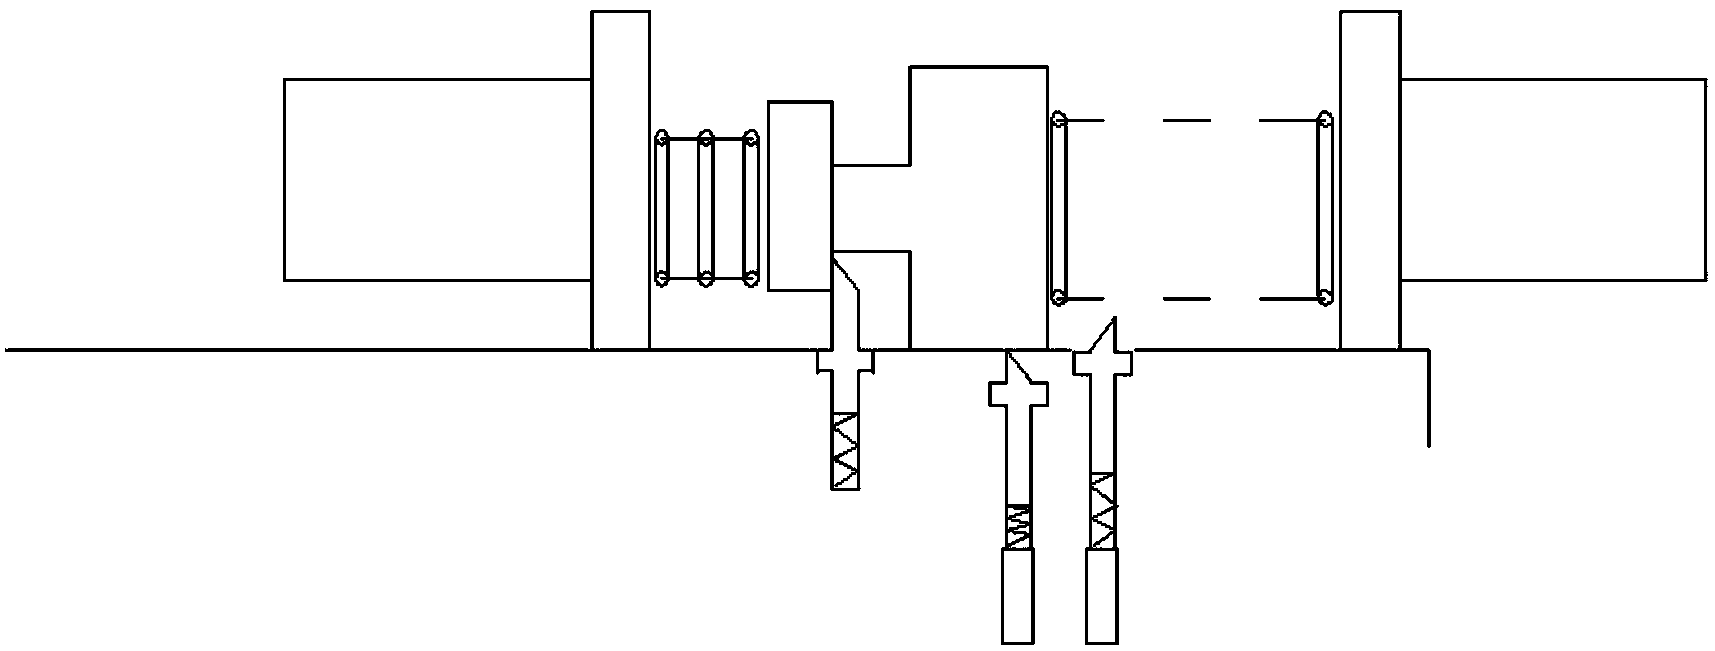 High-voltage isolating switch